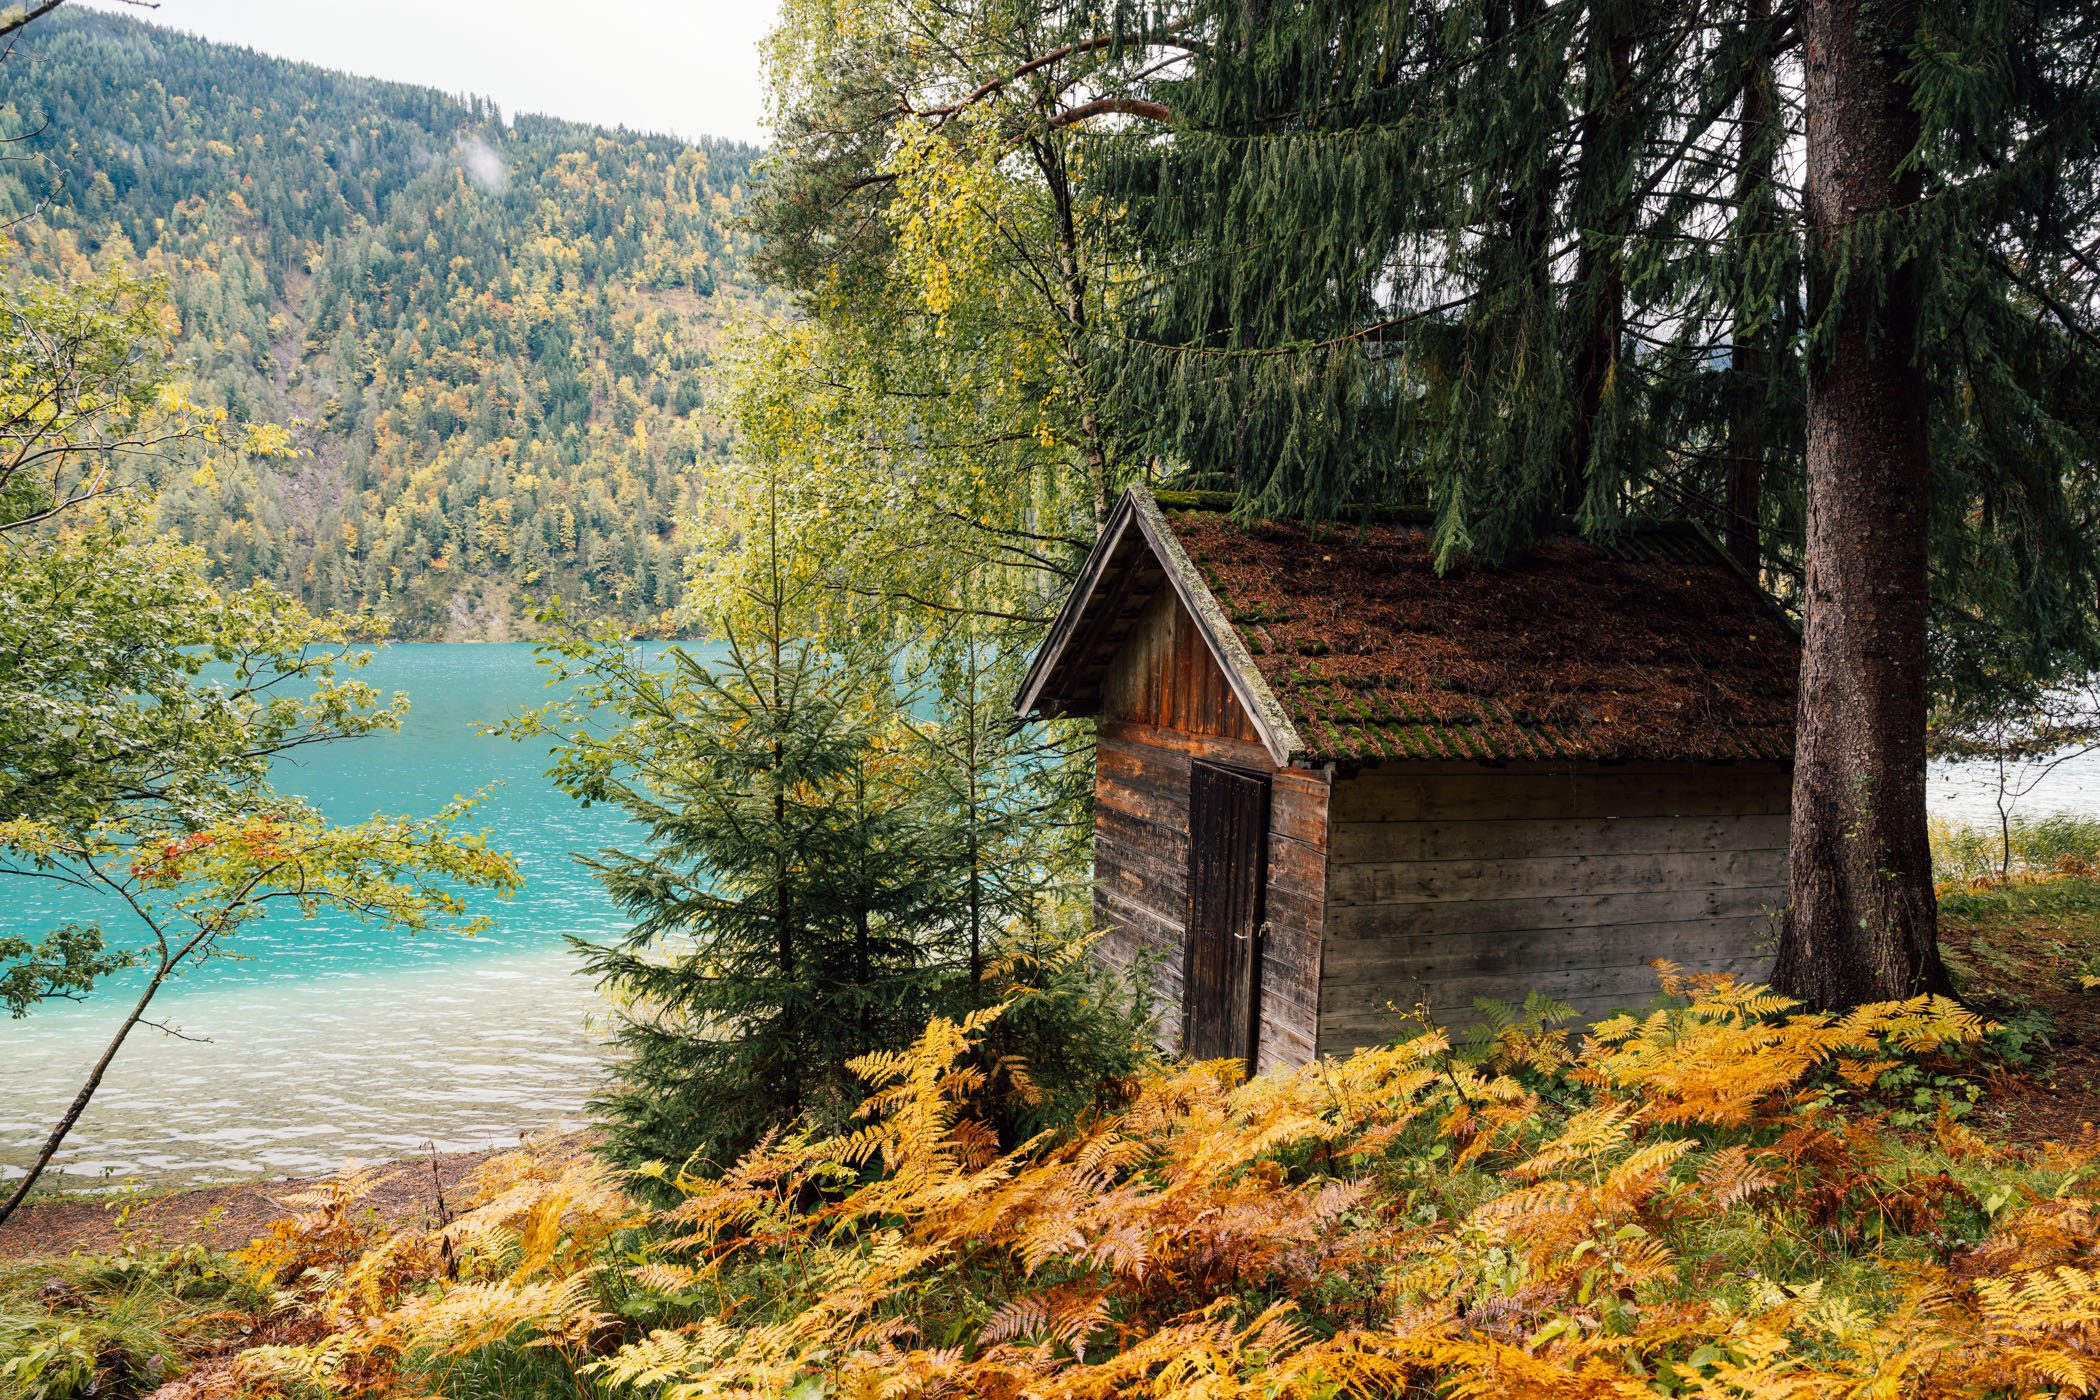 The Northern shore of lake Weissensee